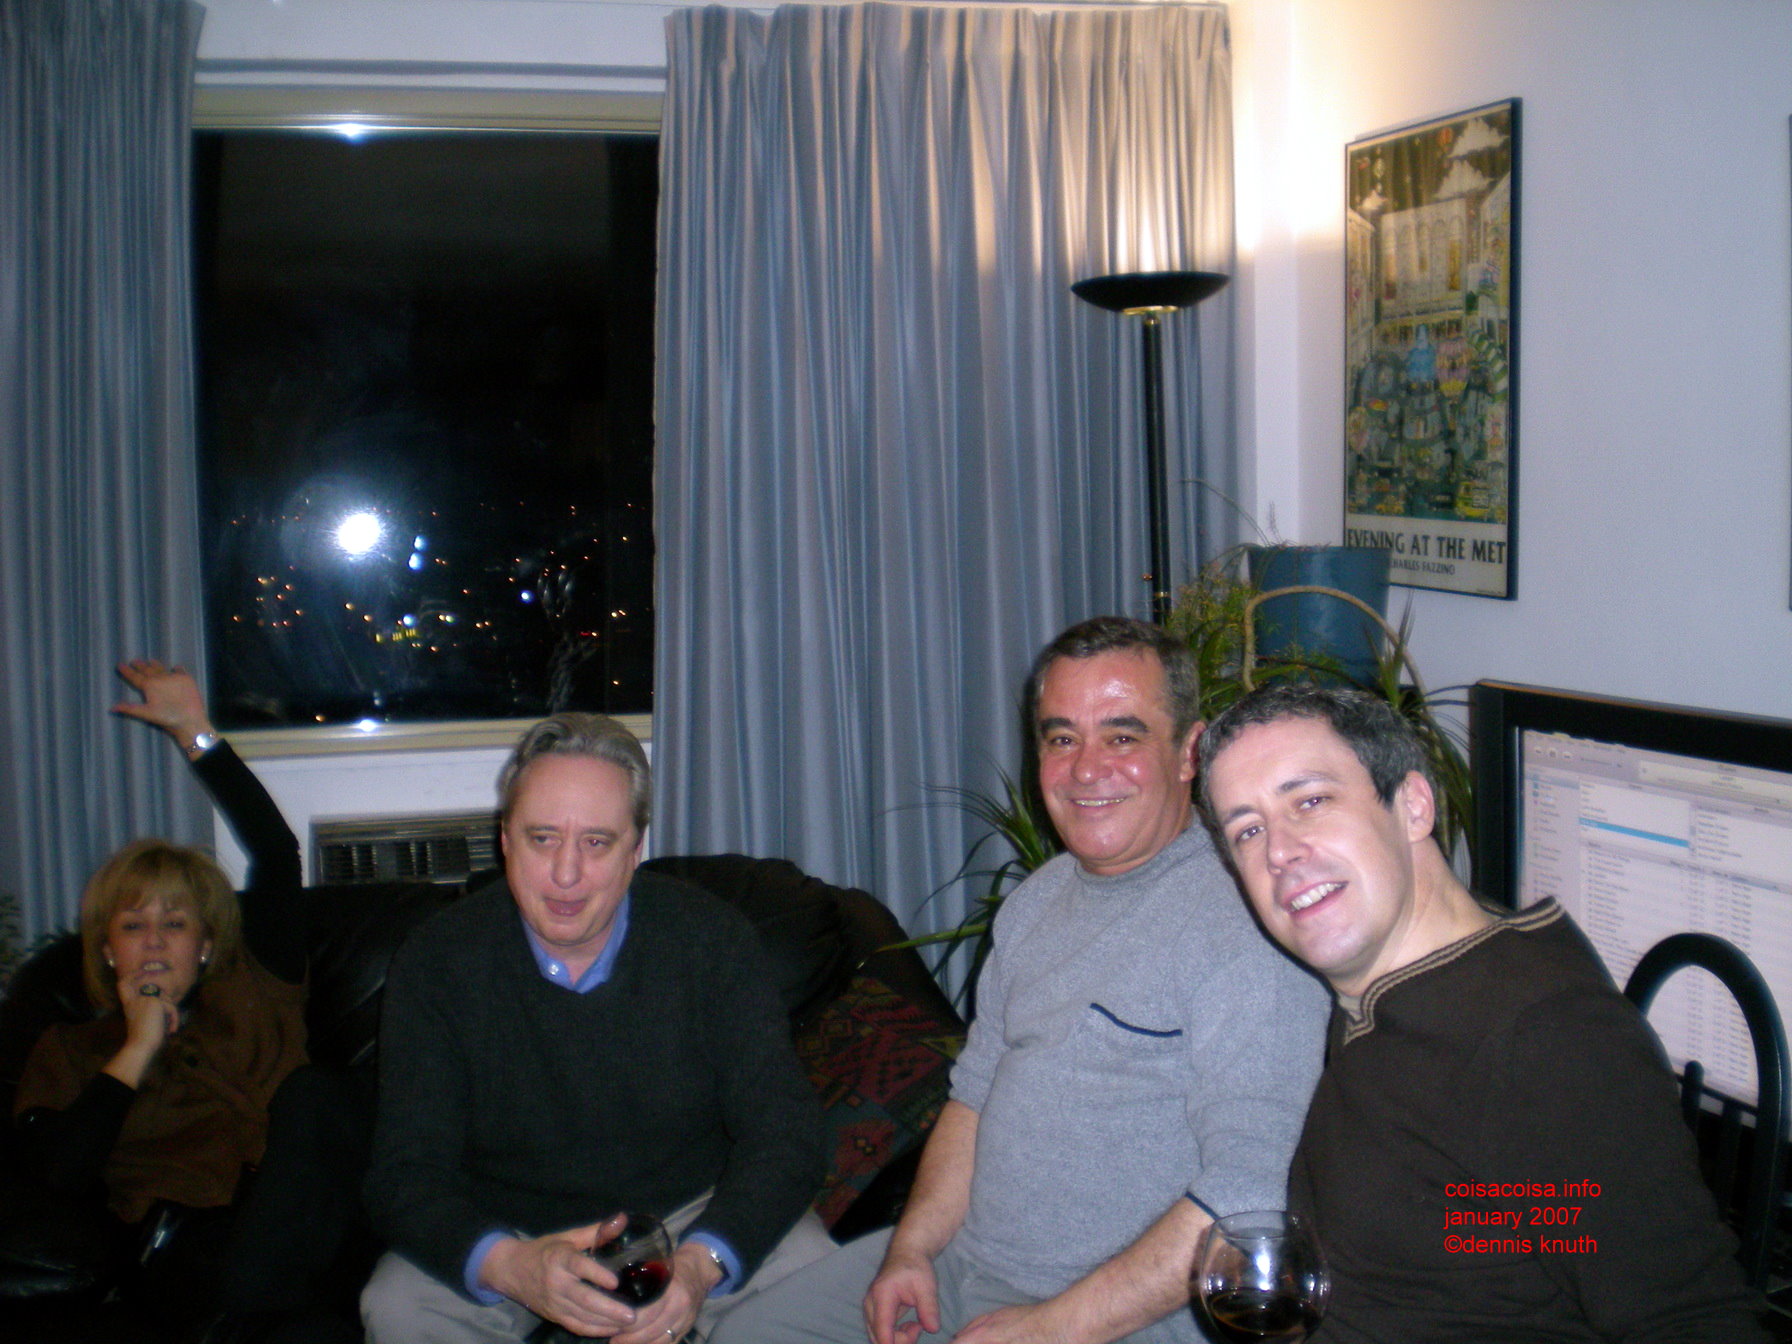 Yeda Brian, Helton and Paulo at the party